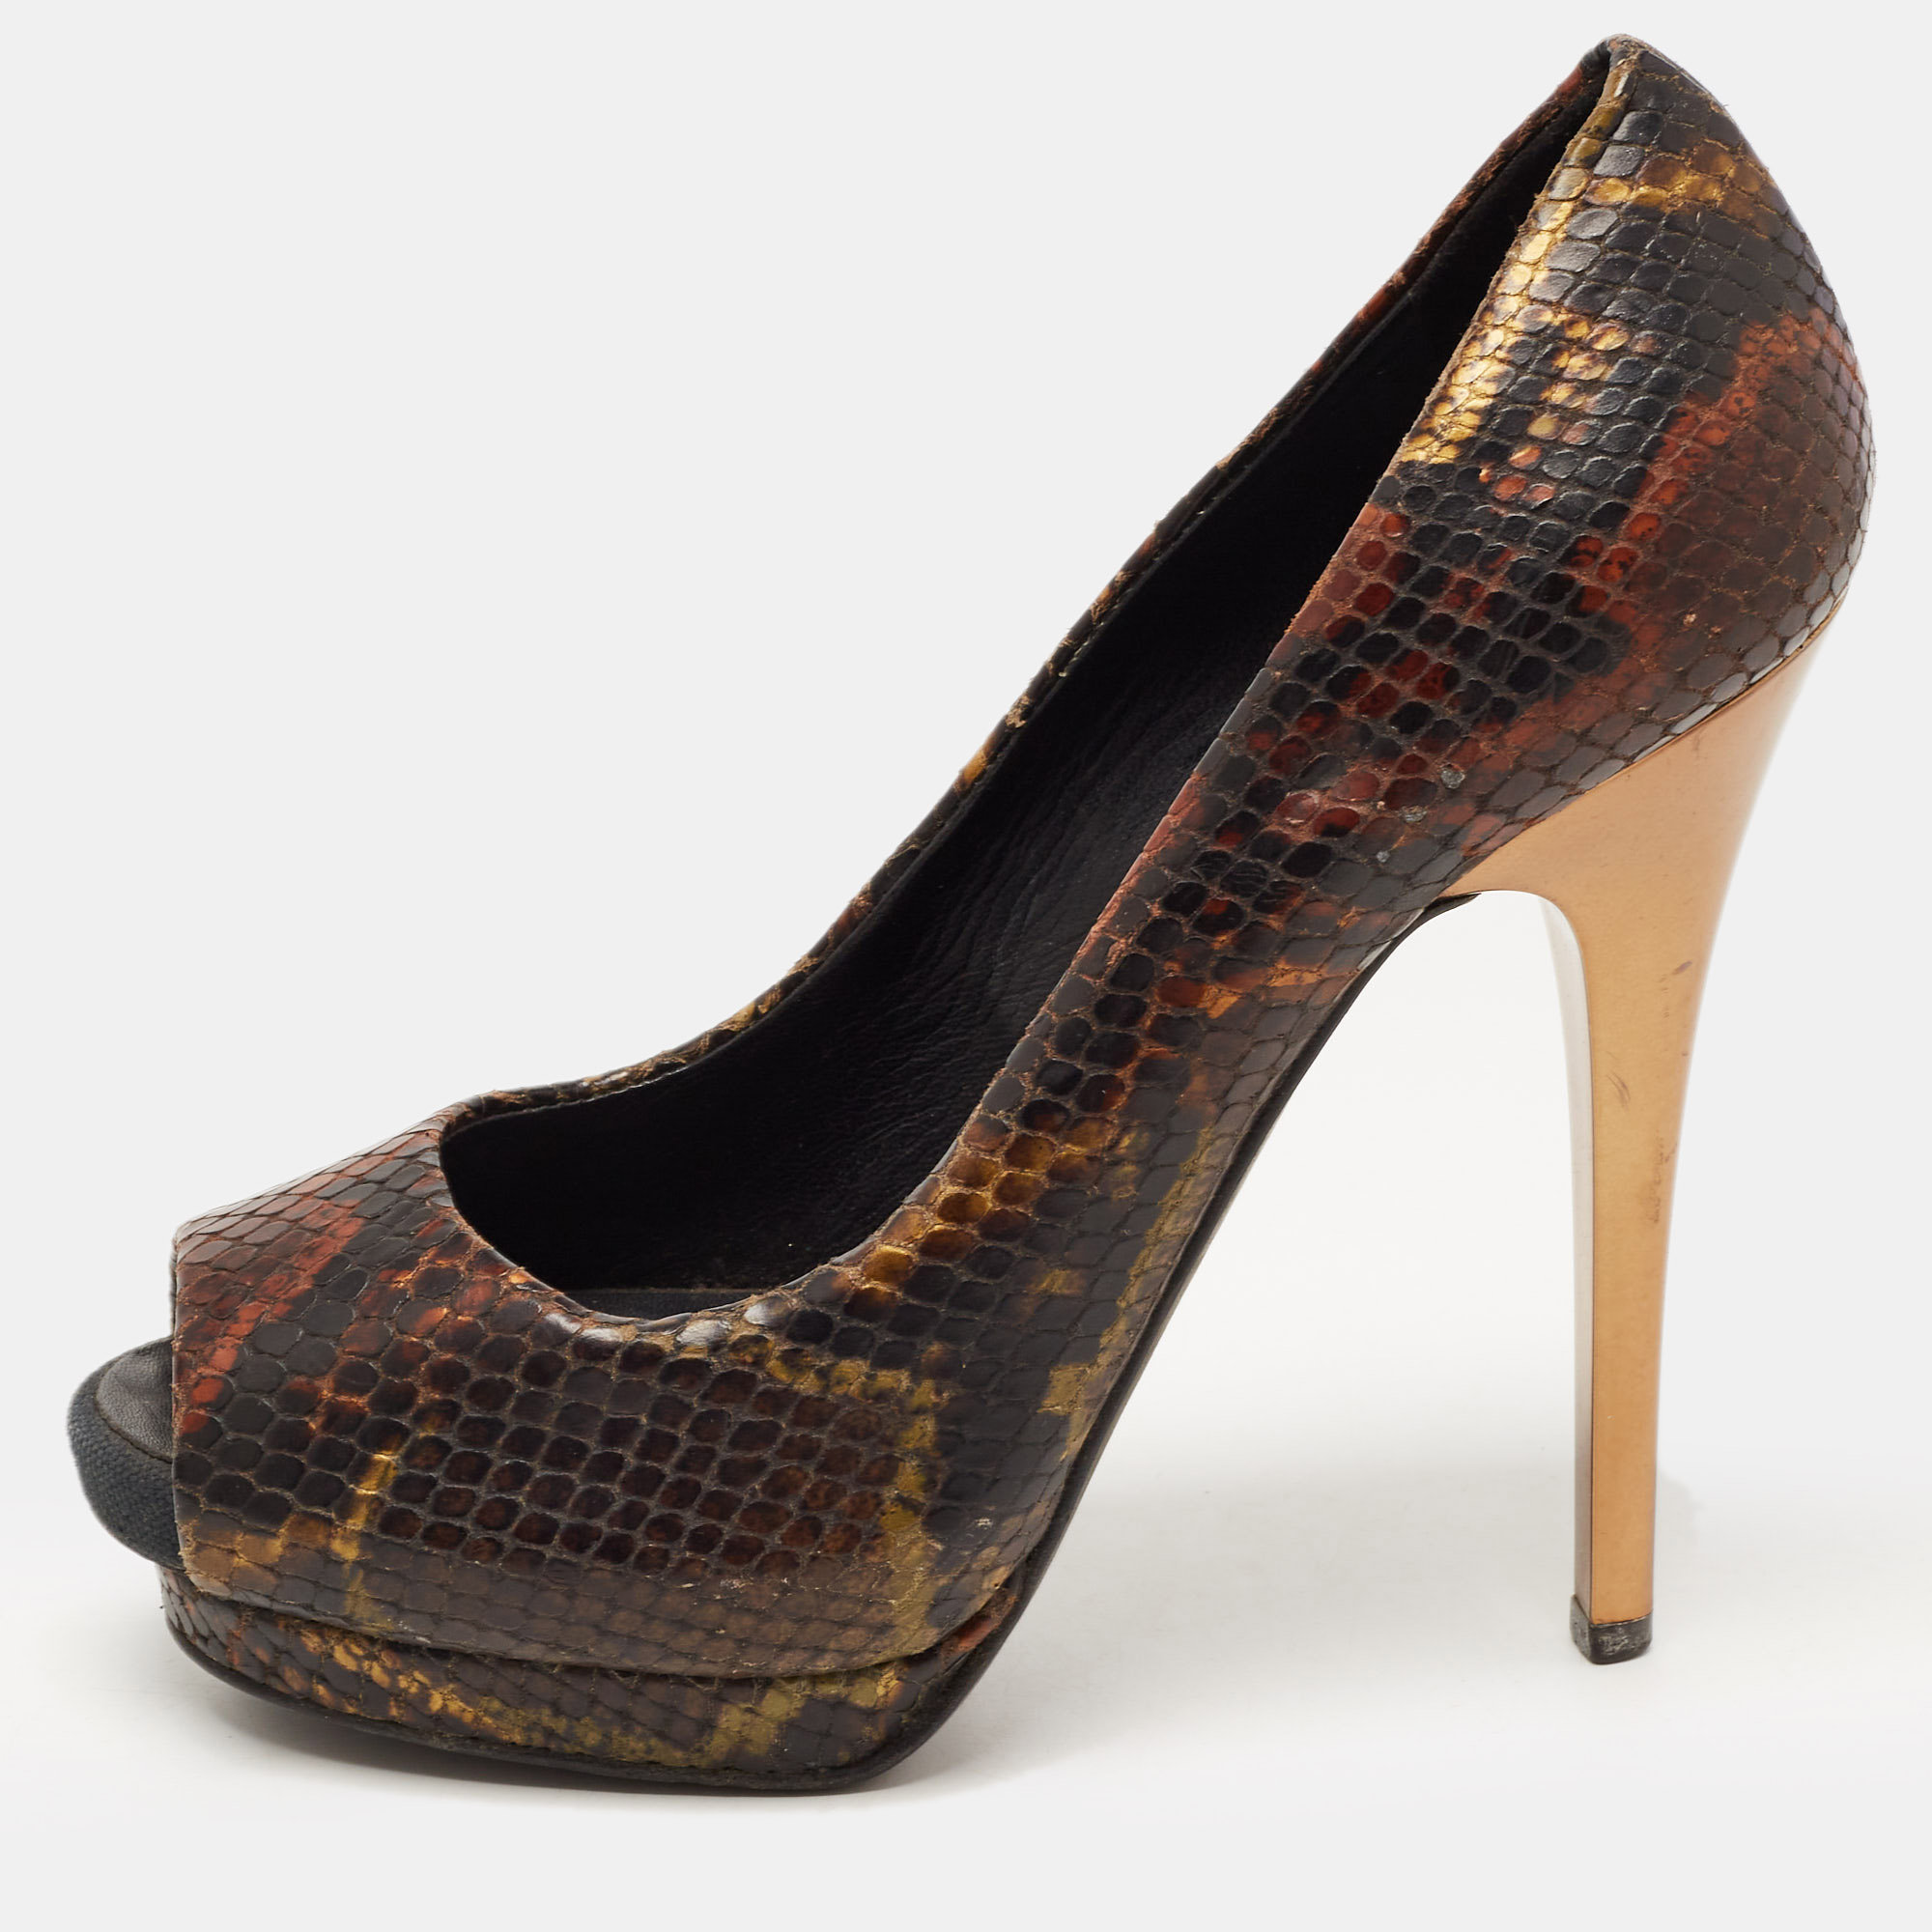 Pre-owned Giuseppe Zanotti Brown Python Embossed Leather Peep Toe Pumps Size 35